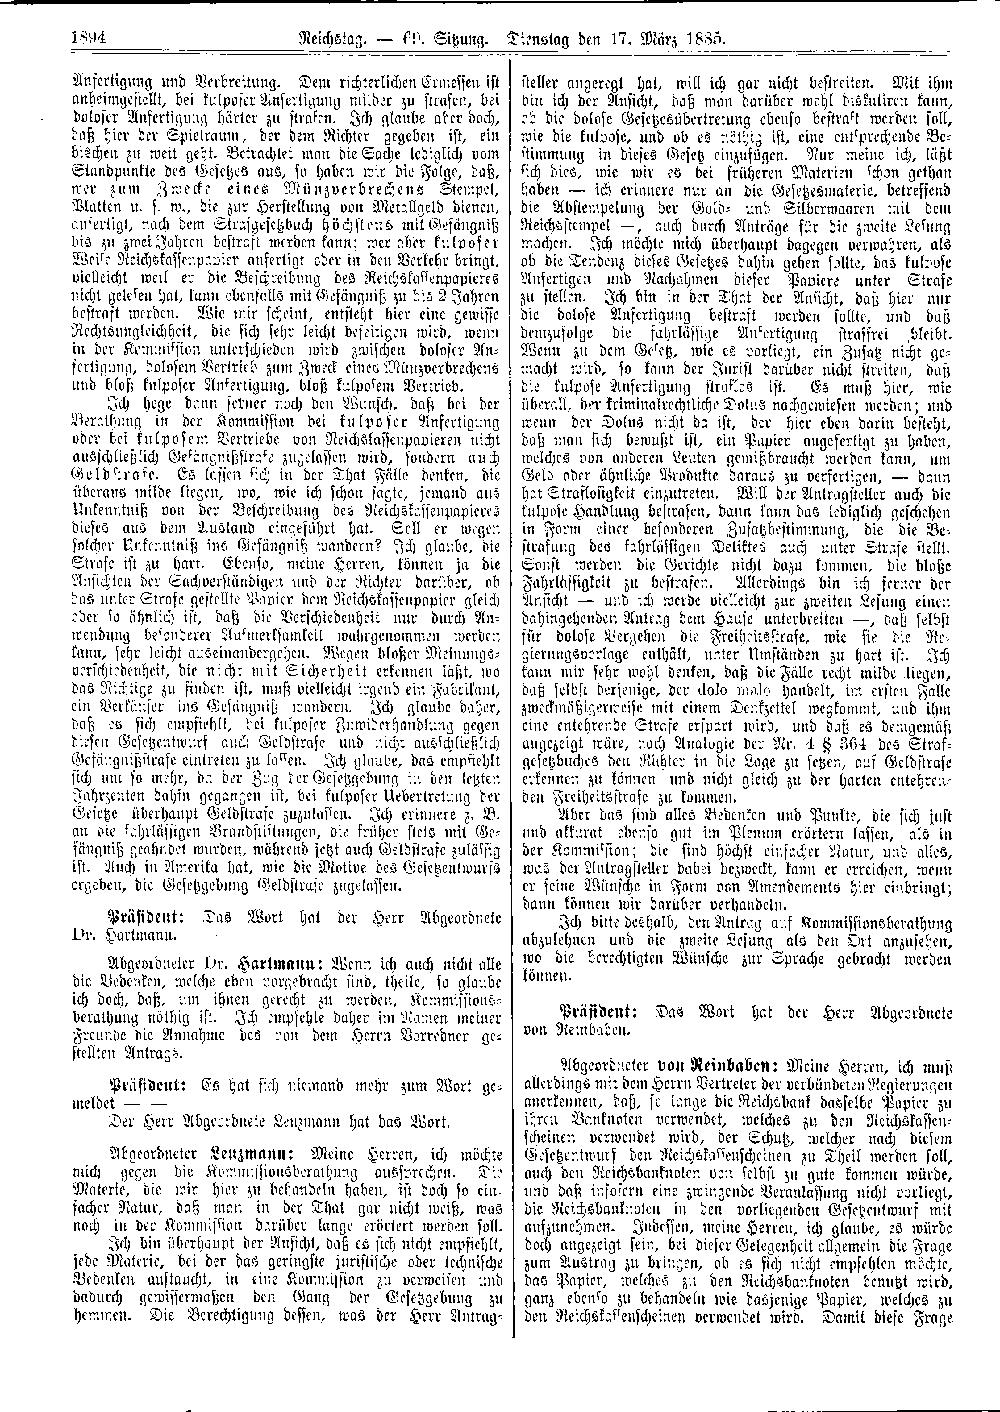 Scan of page 1894